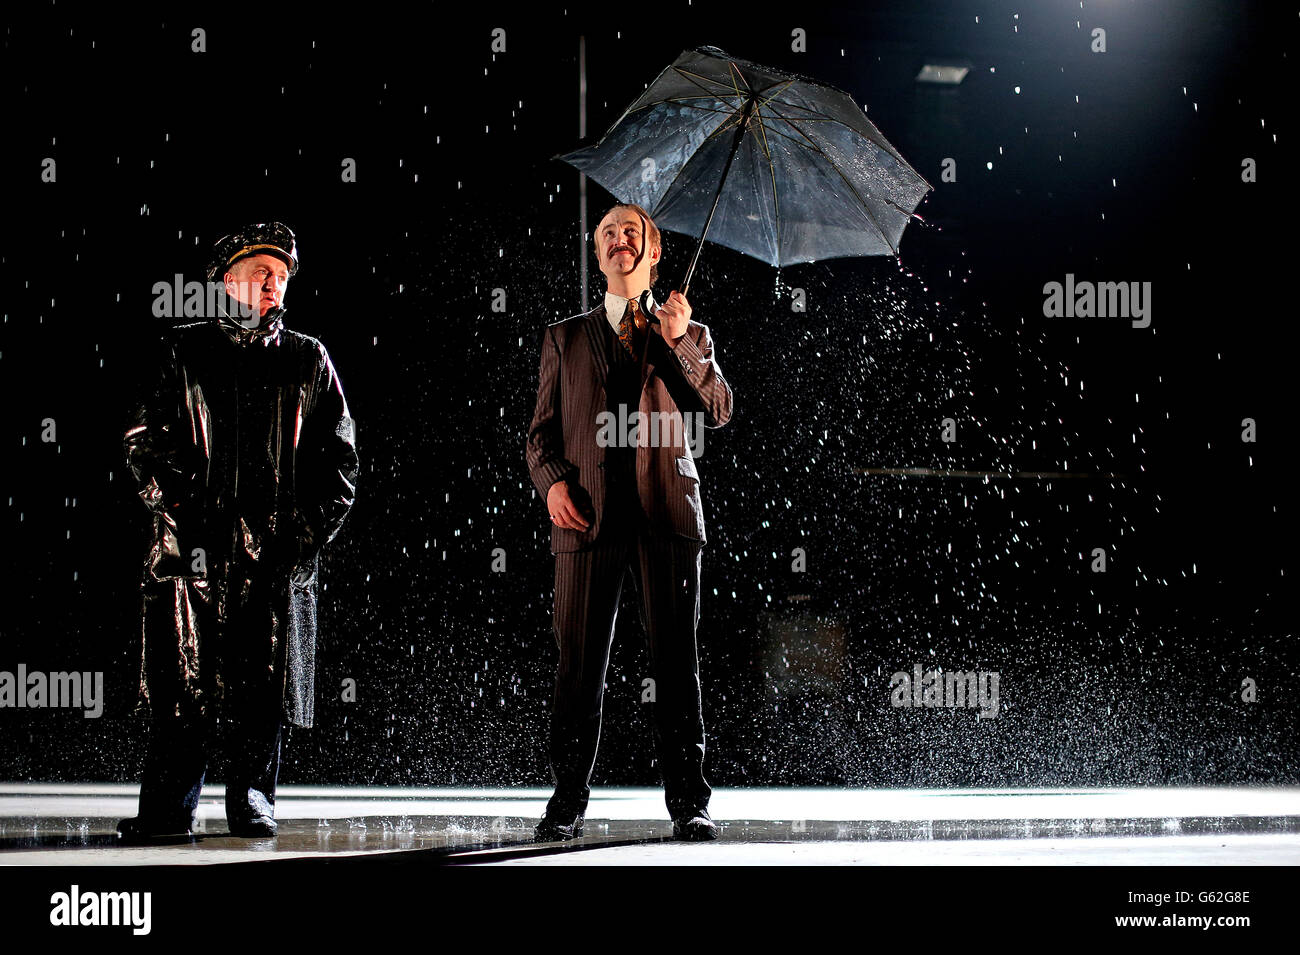 Actors Gary Lydon playing a New York Police Chief (left) and Decaln Conlon as the lead Gangster during a rain shower on stage at the Abbey Theatre in Dublin during rehearsals for Drum Belly, a new play by writer Richard Dormer which has it's world premiere tomorrow night. Stock Photo